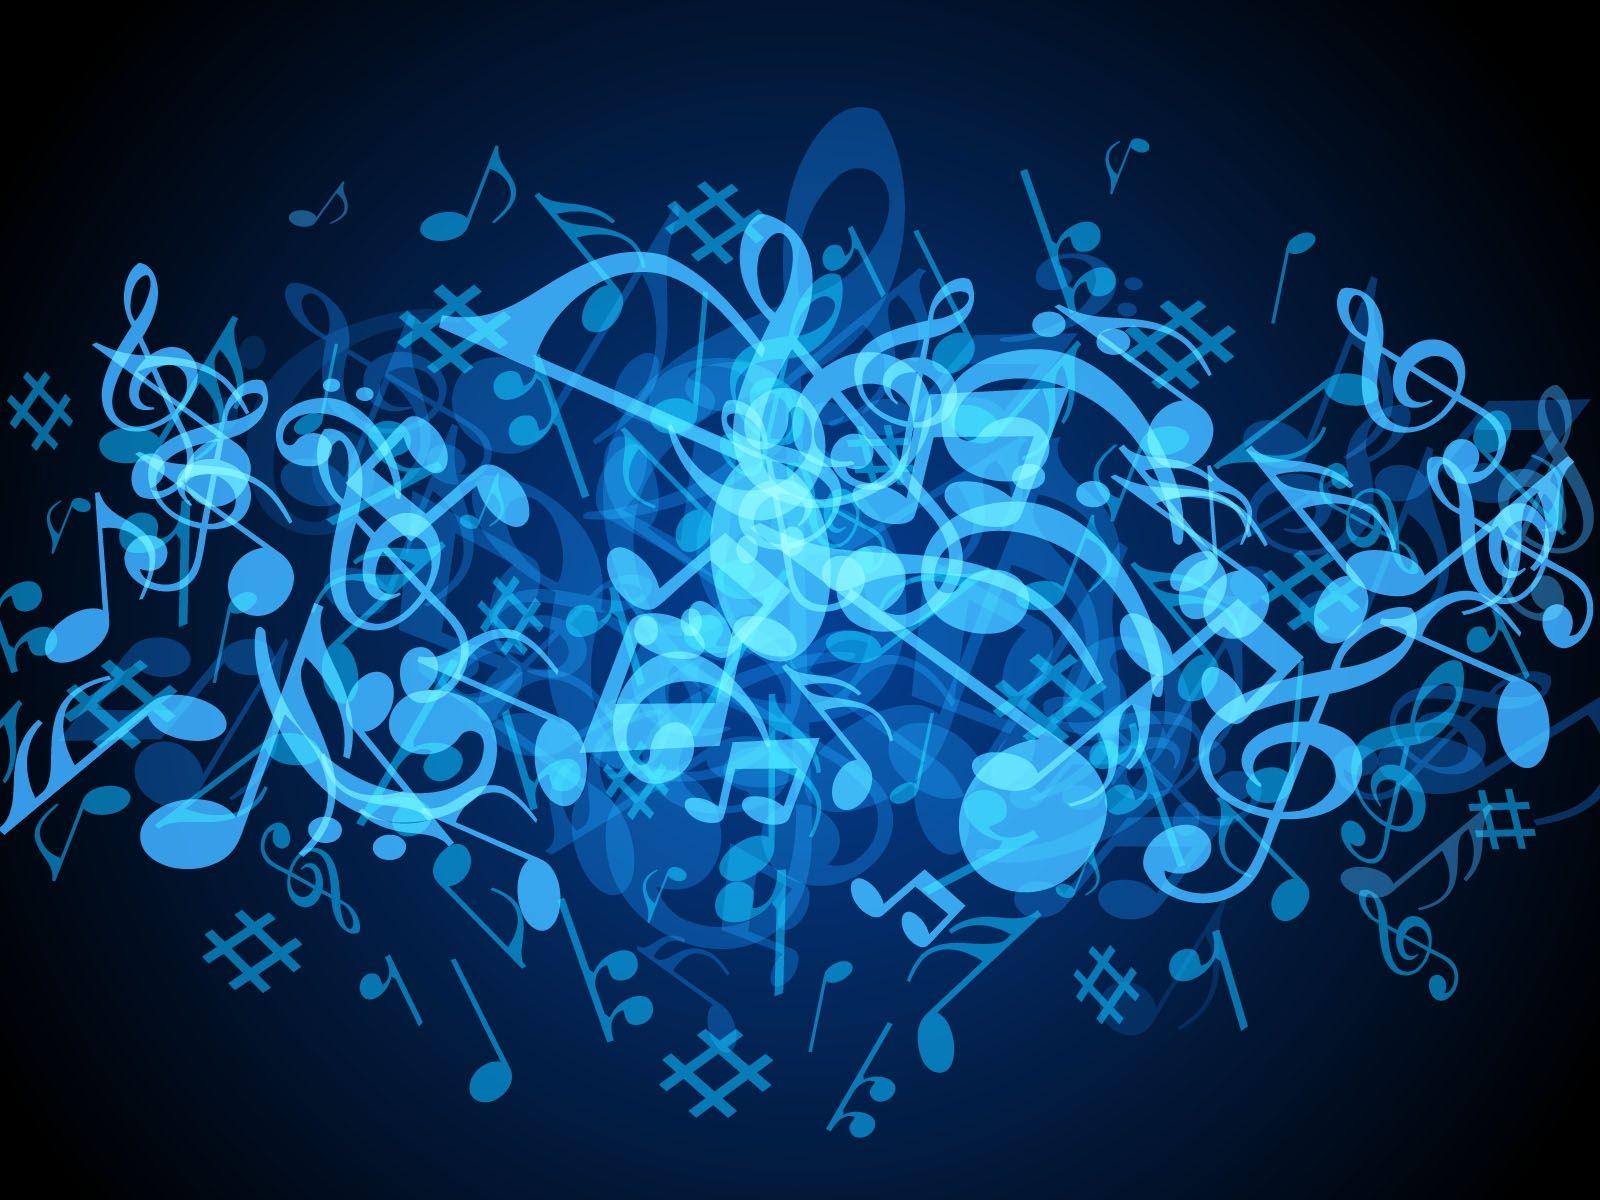 Abstract Music Wallpaper 48716 1600x1200 px